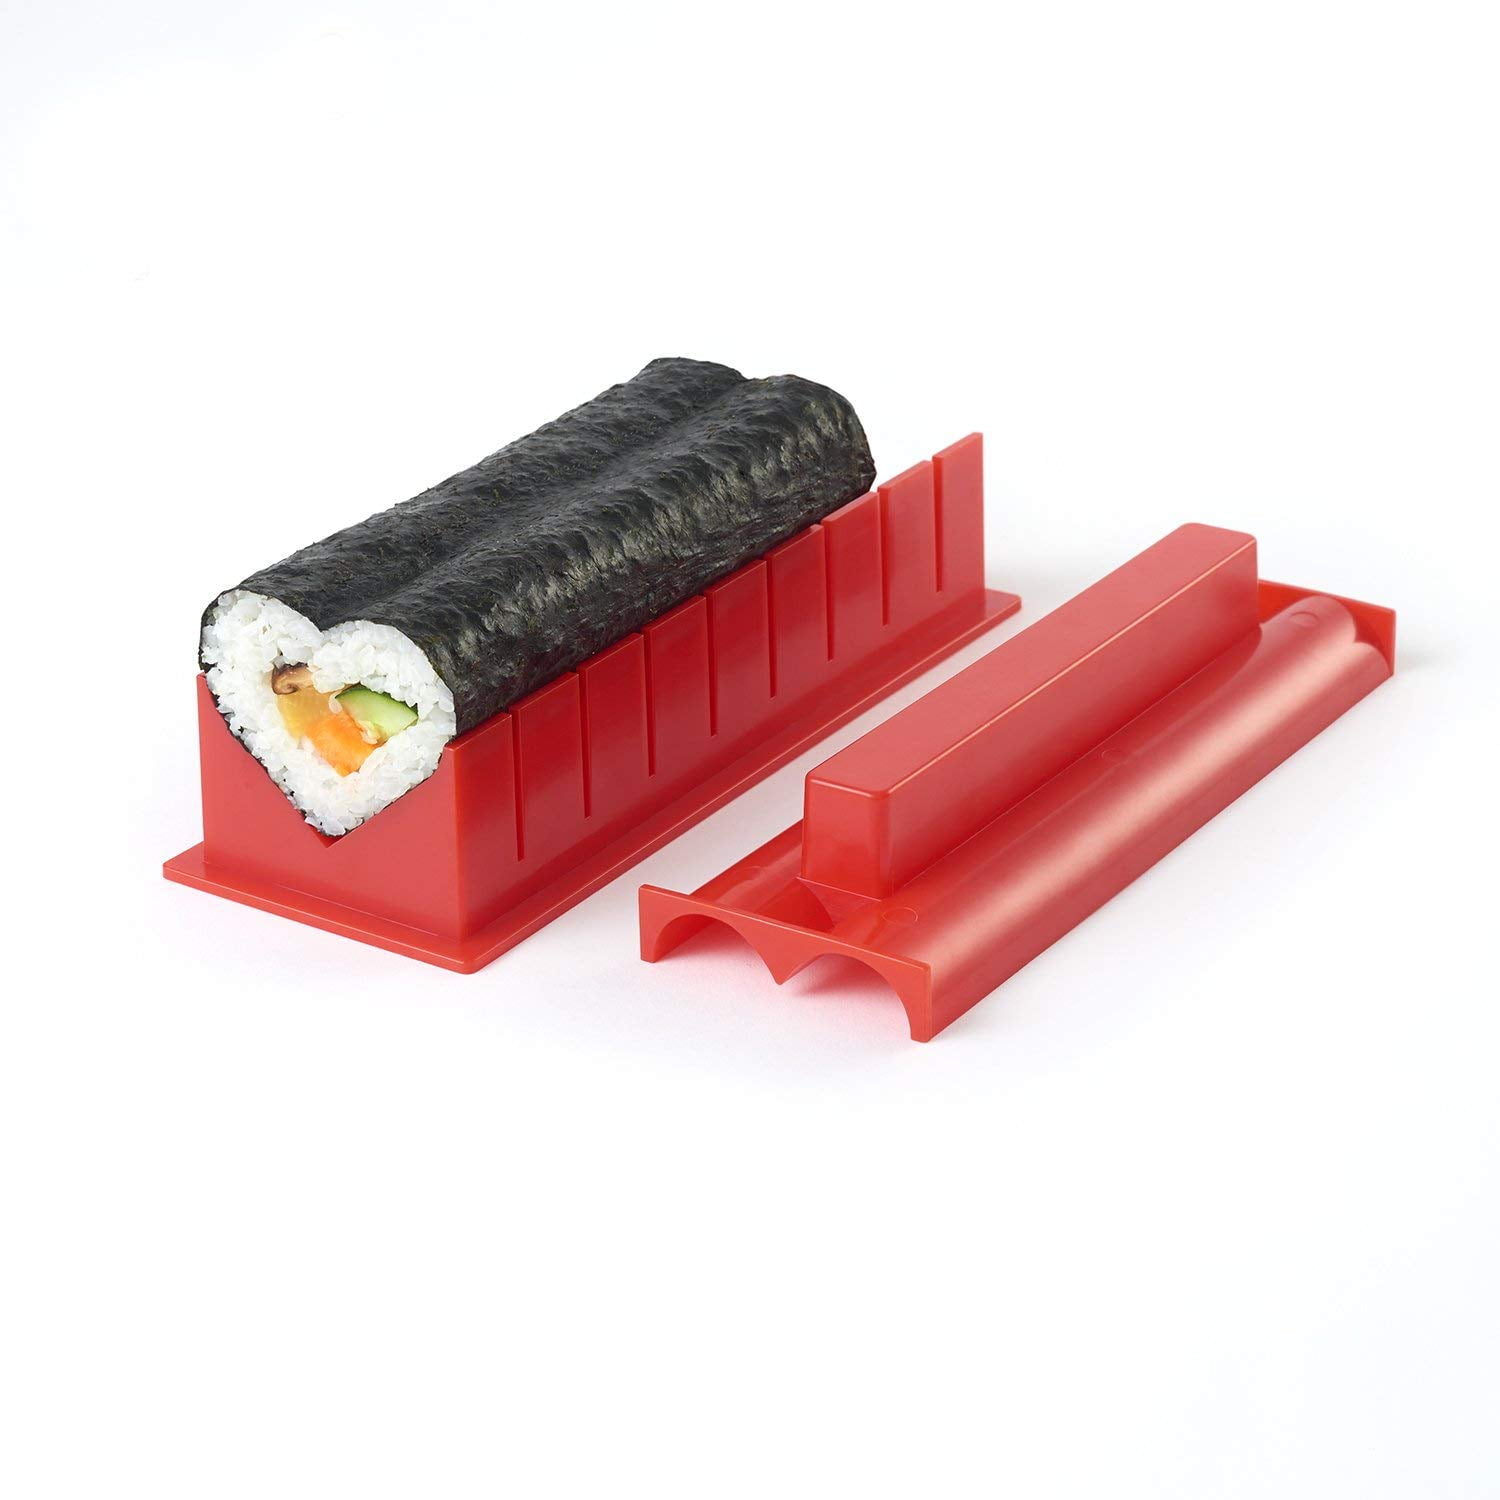 Alas Sushi Making Kit- Complete 20 Piece Sushi Making Kit for Beginners &  Pros Sushi Makers, Perfect Sushi Making Kitchen Accessories Like Sushi